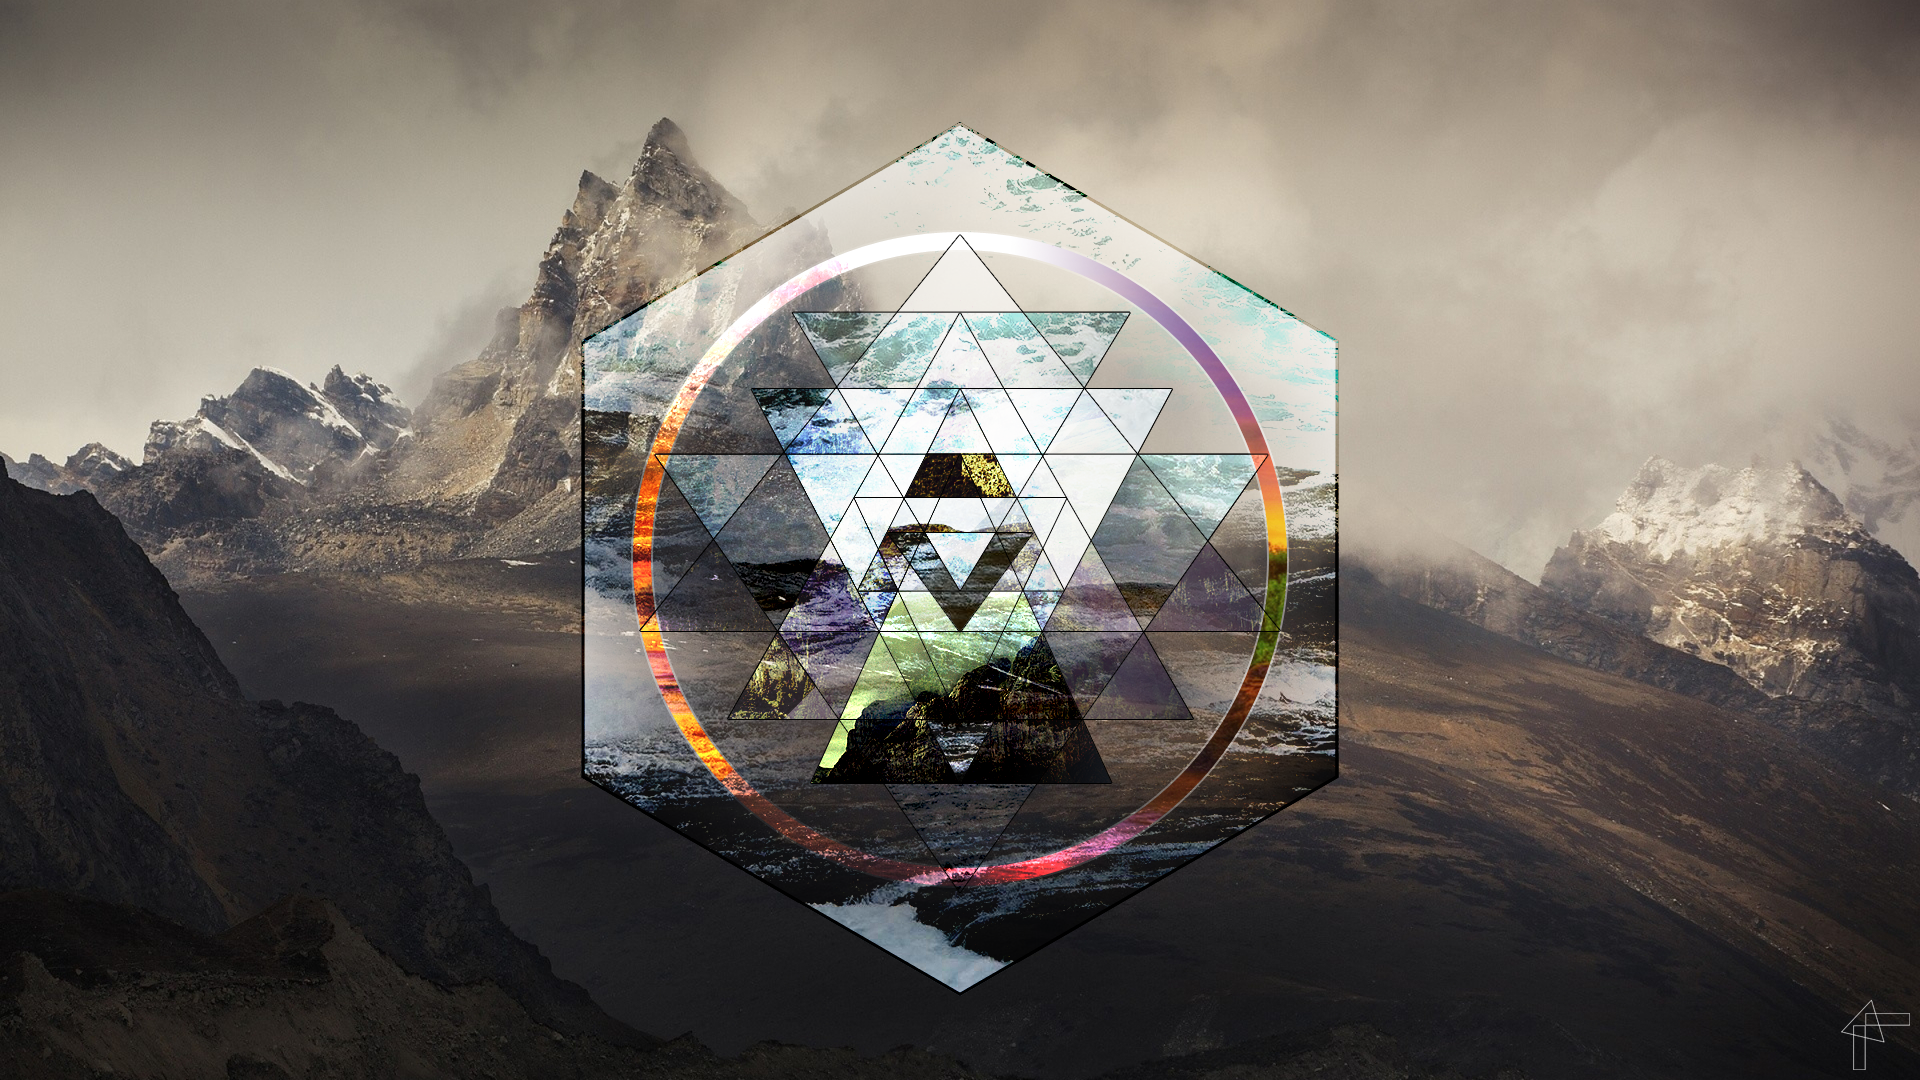 General 1920x1080 landscape low poly hexagon triangle mountains cityscape digital art The Trident Mountain 2012 (Year) South Georgia artwork nature